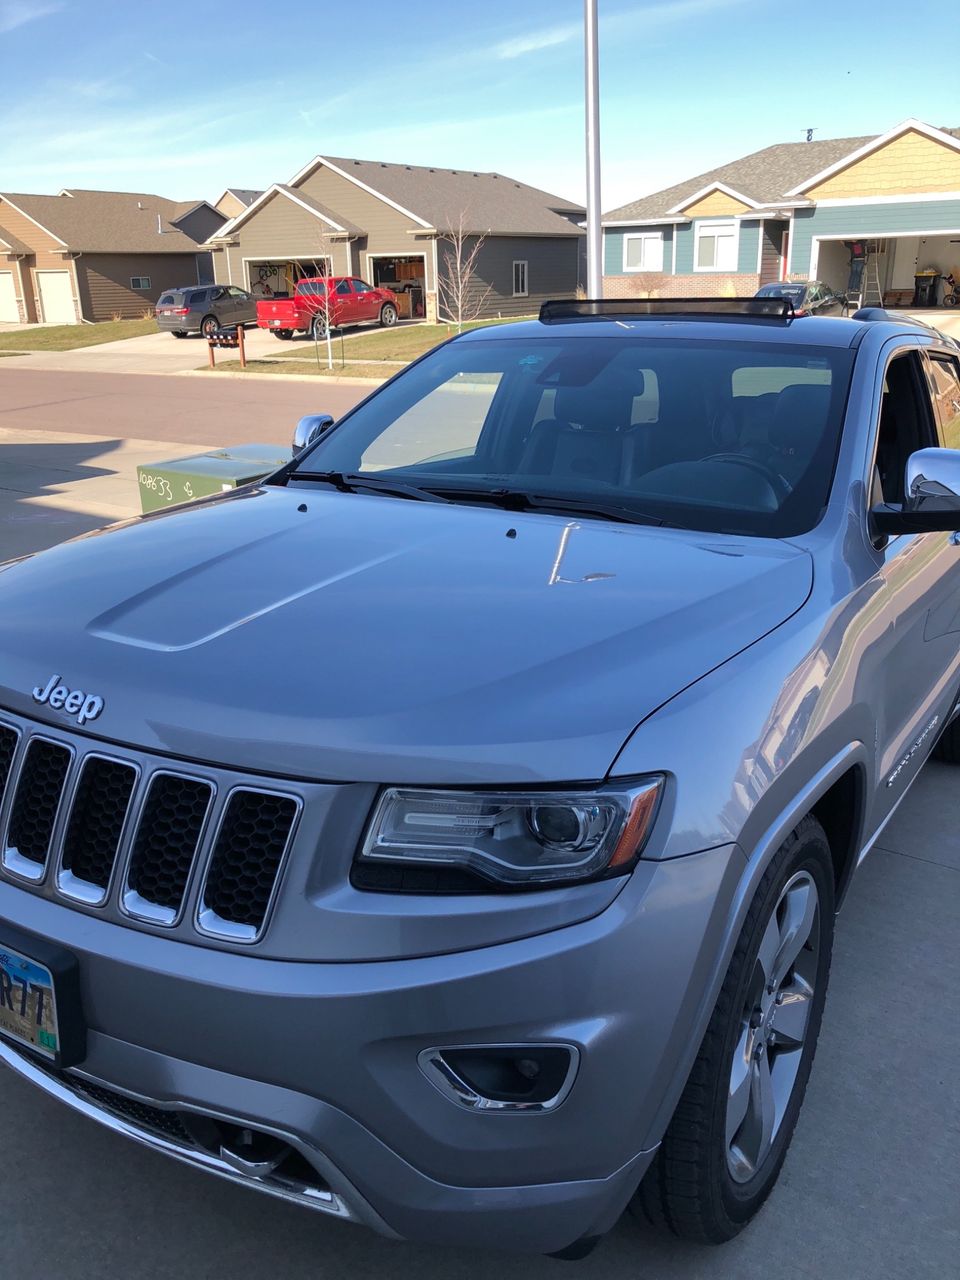 2014 Jeep Grand Cherokee Overland | Worthing, SD, Billet Silver Metallic Clear Coat (Silver), 4x4